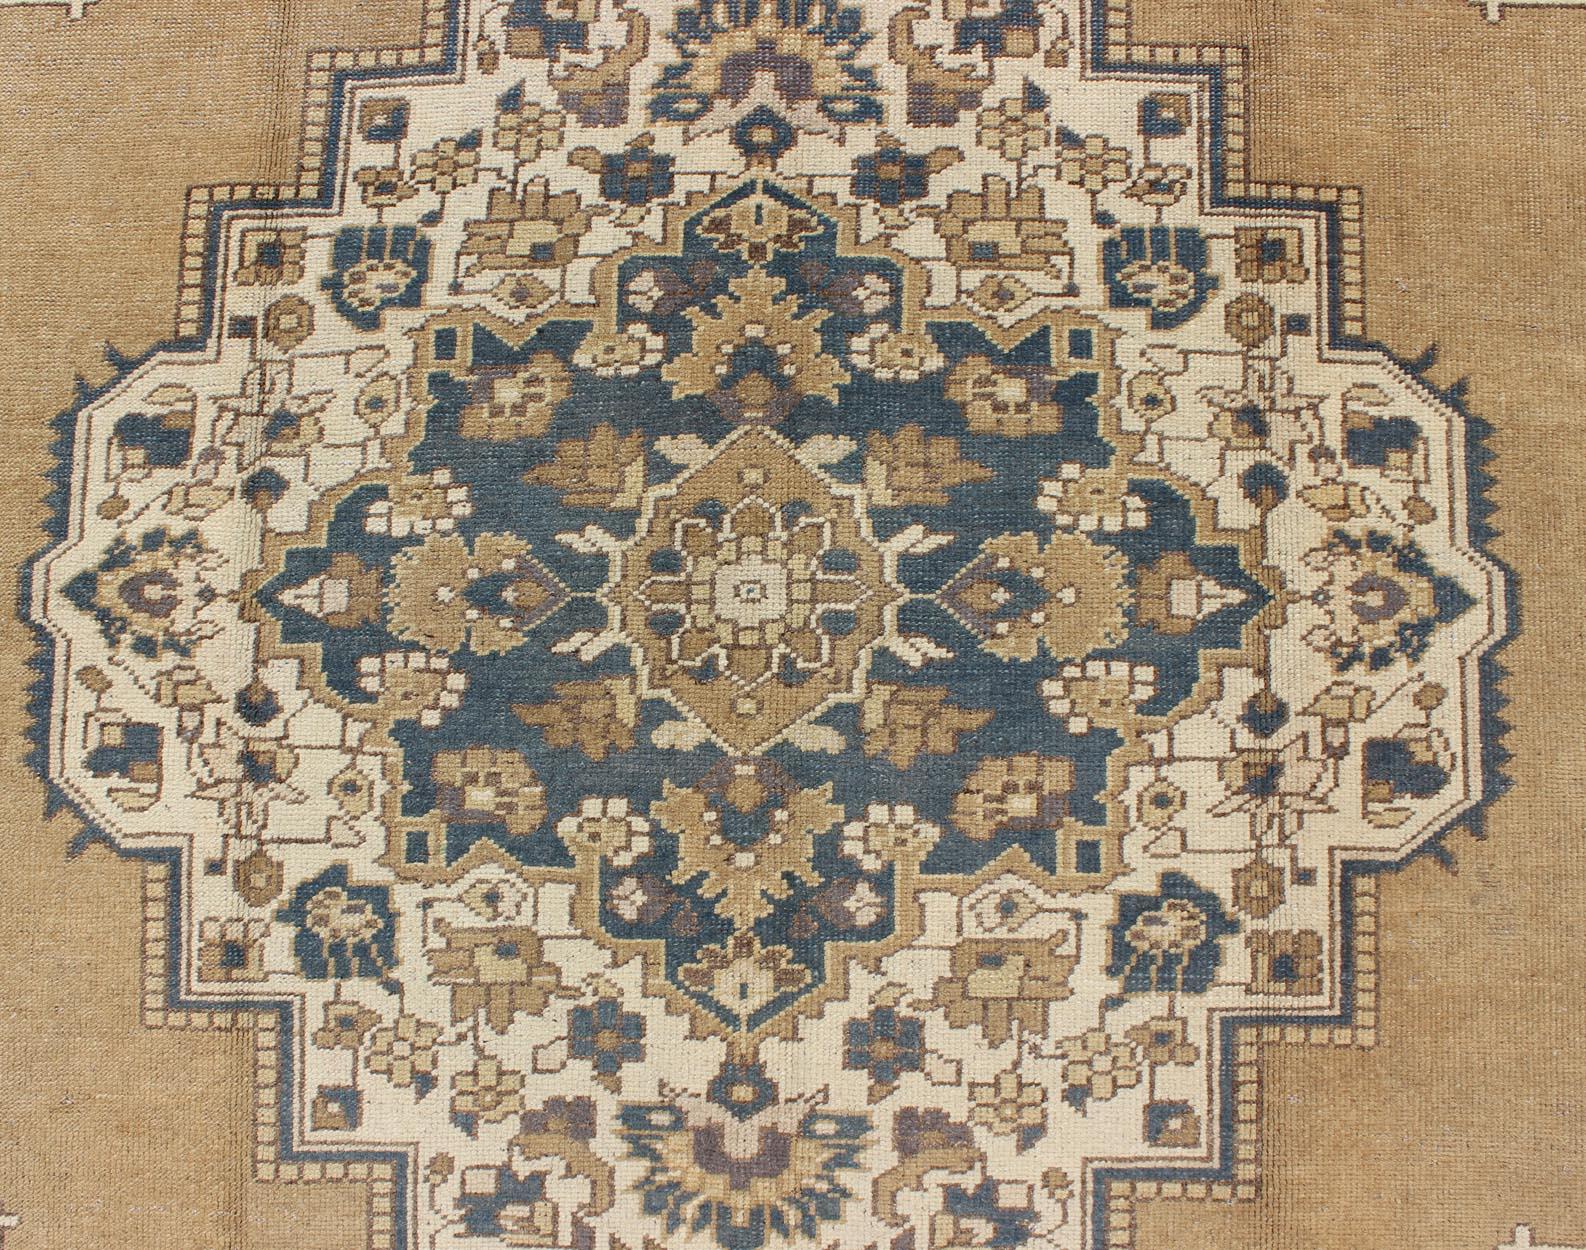 Measures: 6'10'' x 11'5''

Characterized by a comely and highly representative Oushak composition, this vintage carpet beautifully communicates the finer characteristics of Oushak rug weaving. The stylized medallion holds floral motifs, as well as